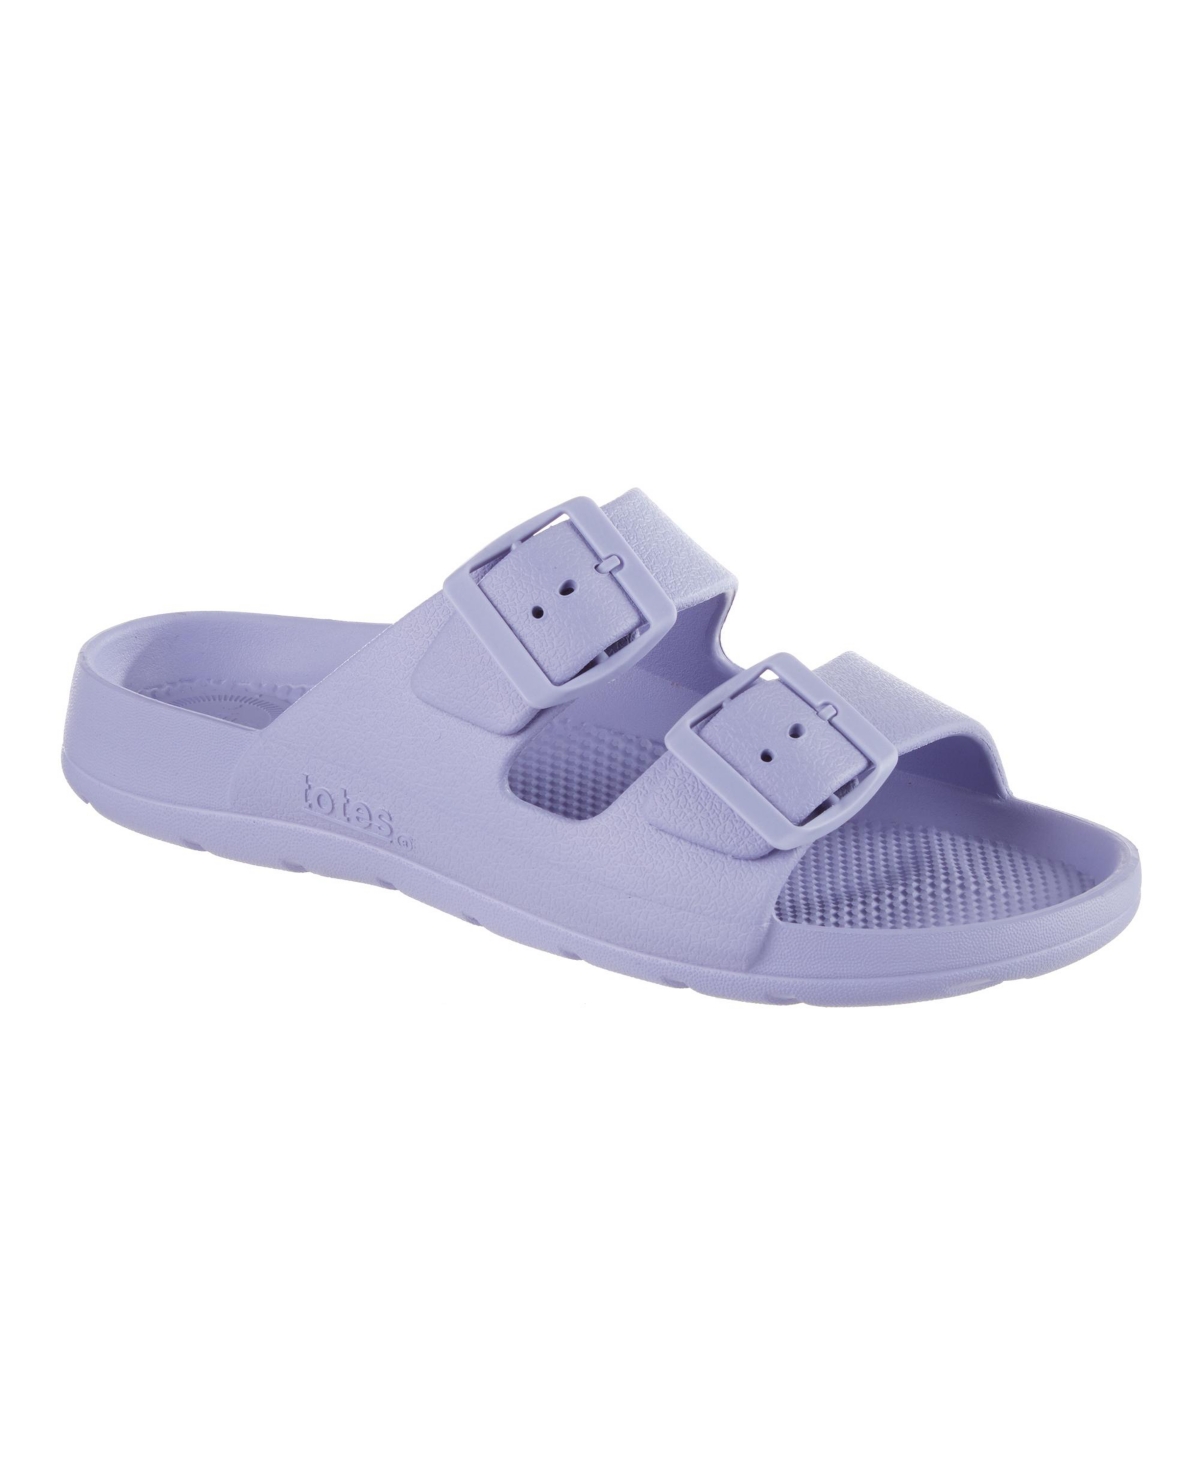 Totes Women's Double Buckle Adjustable Slide With Everywear In Periwinkle